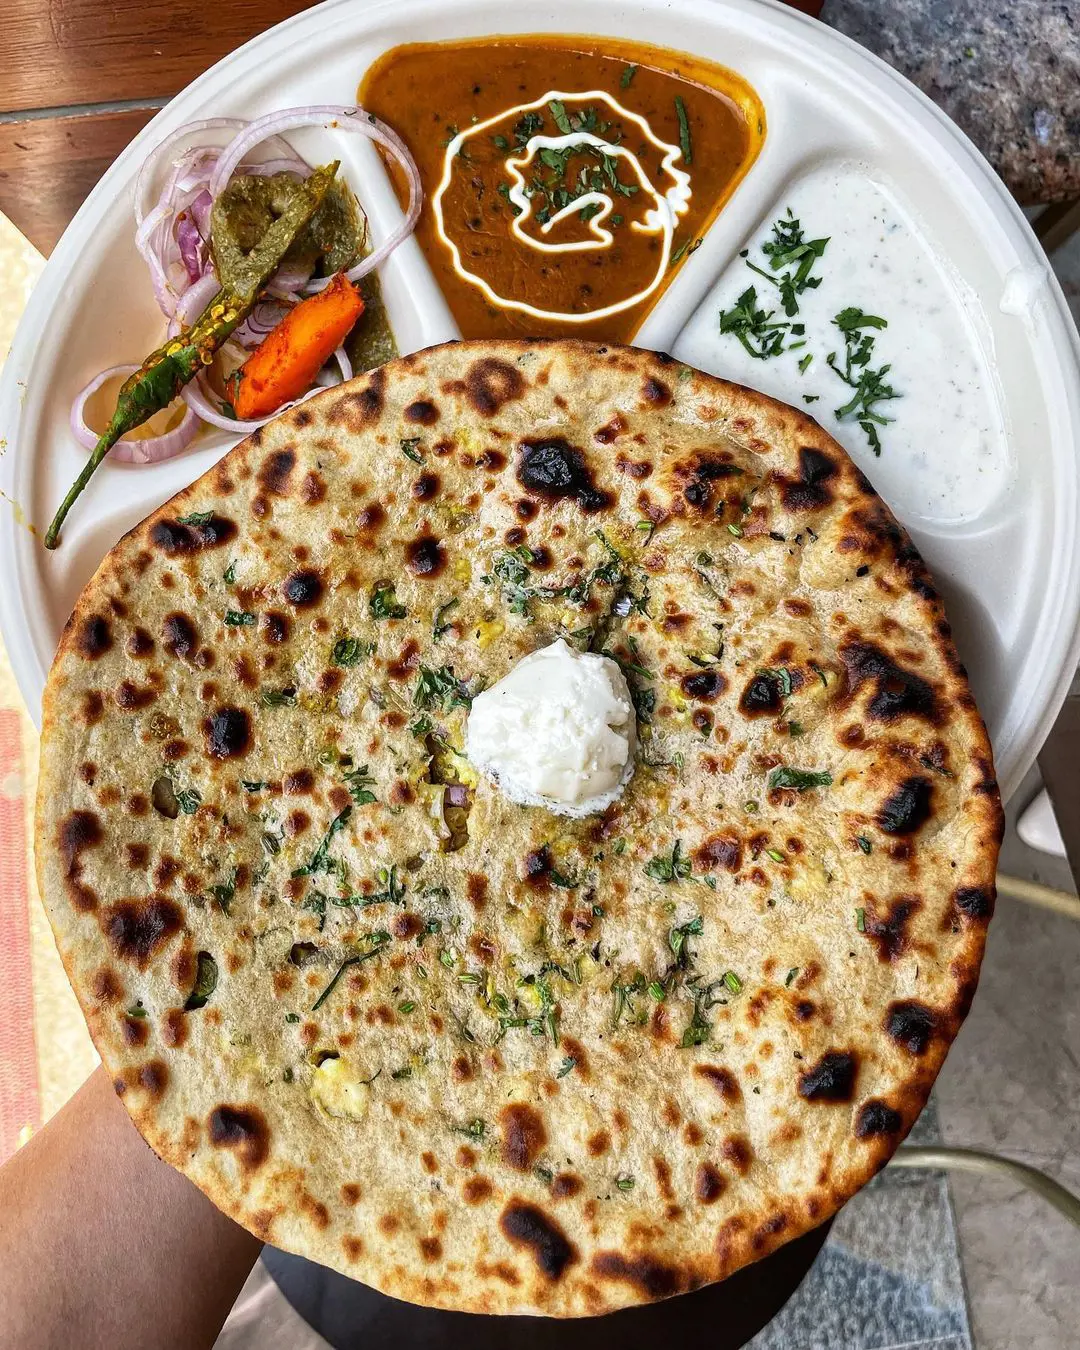 Naan or paratha is made with all purpose flour but you can opt for a healthier option with whole wheat flour